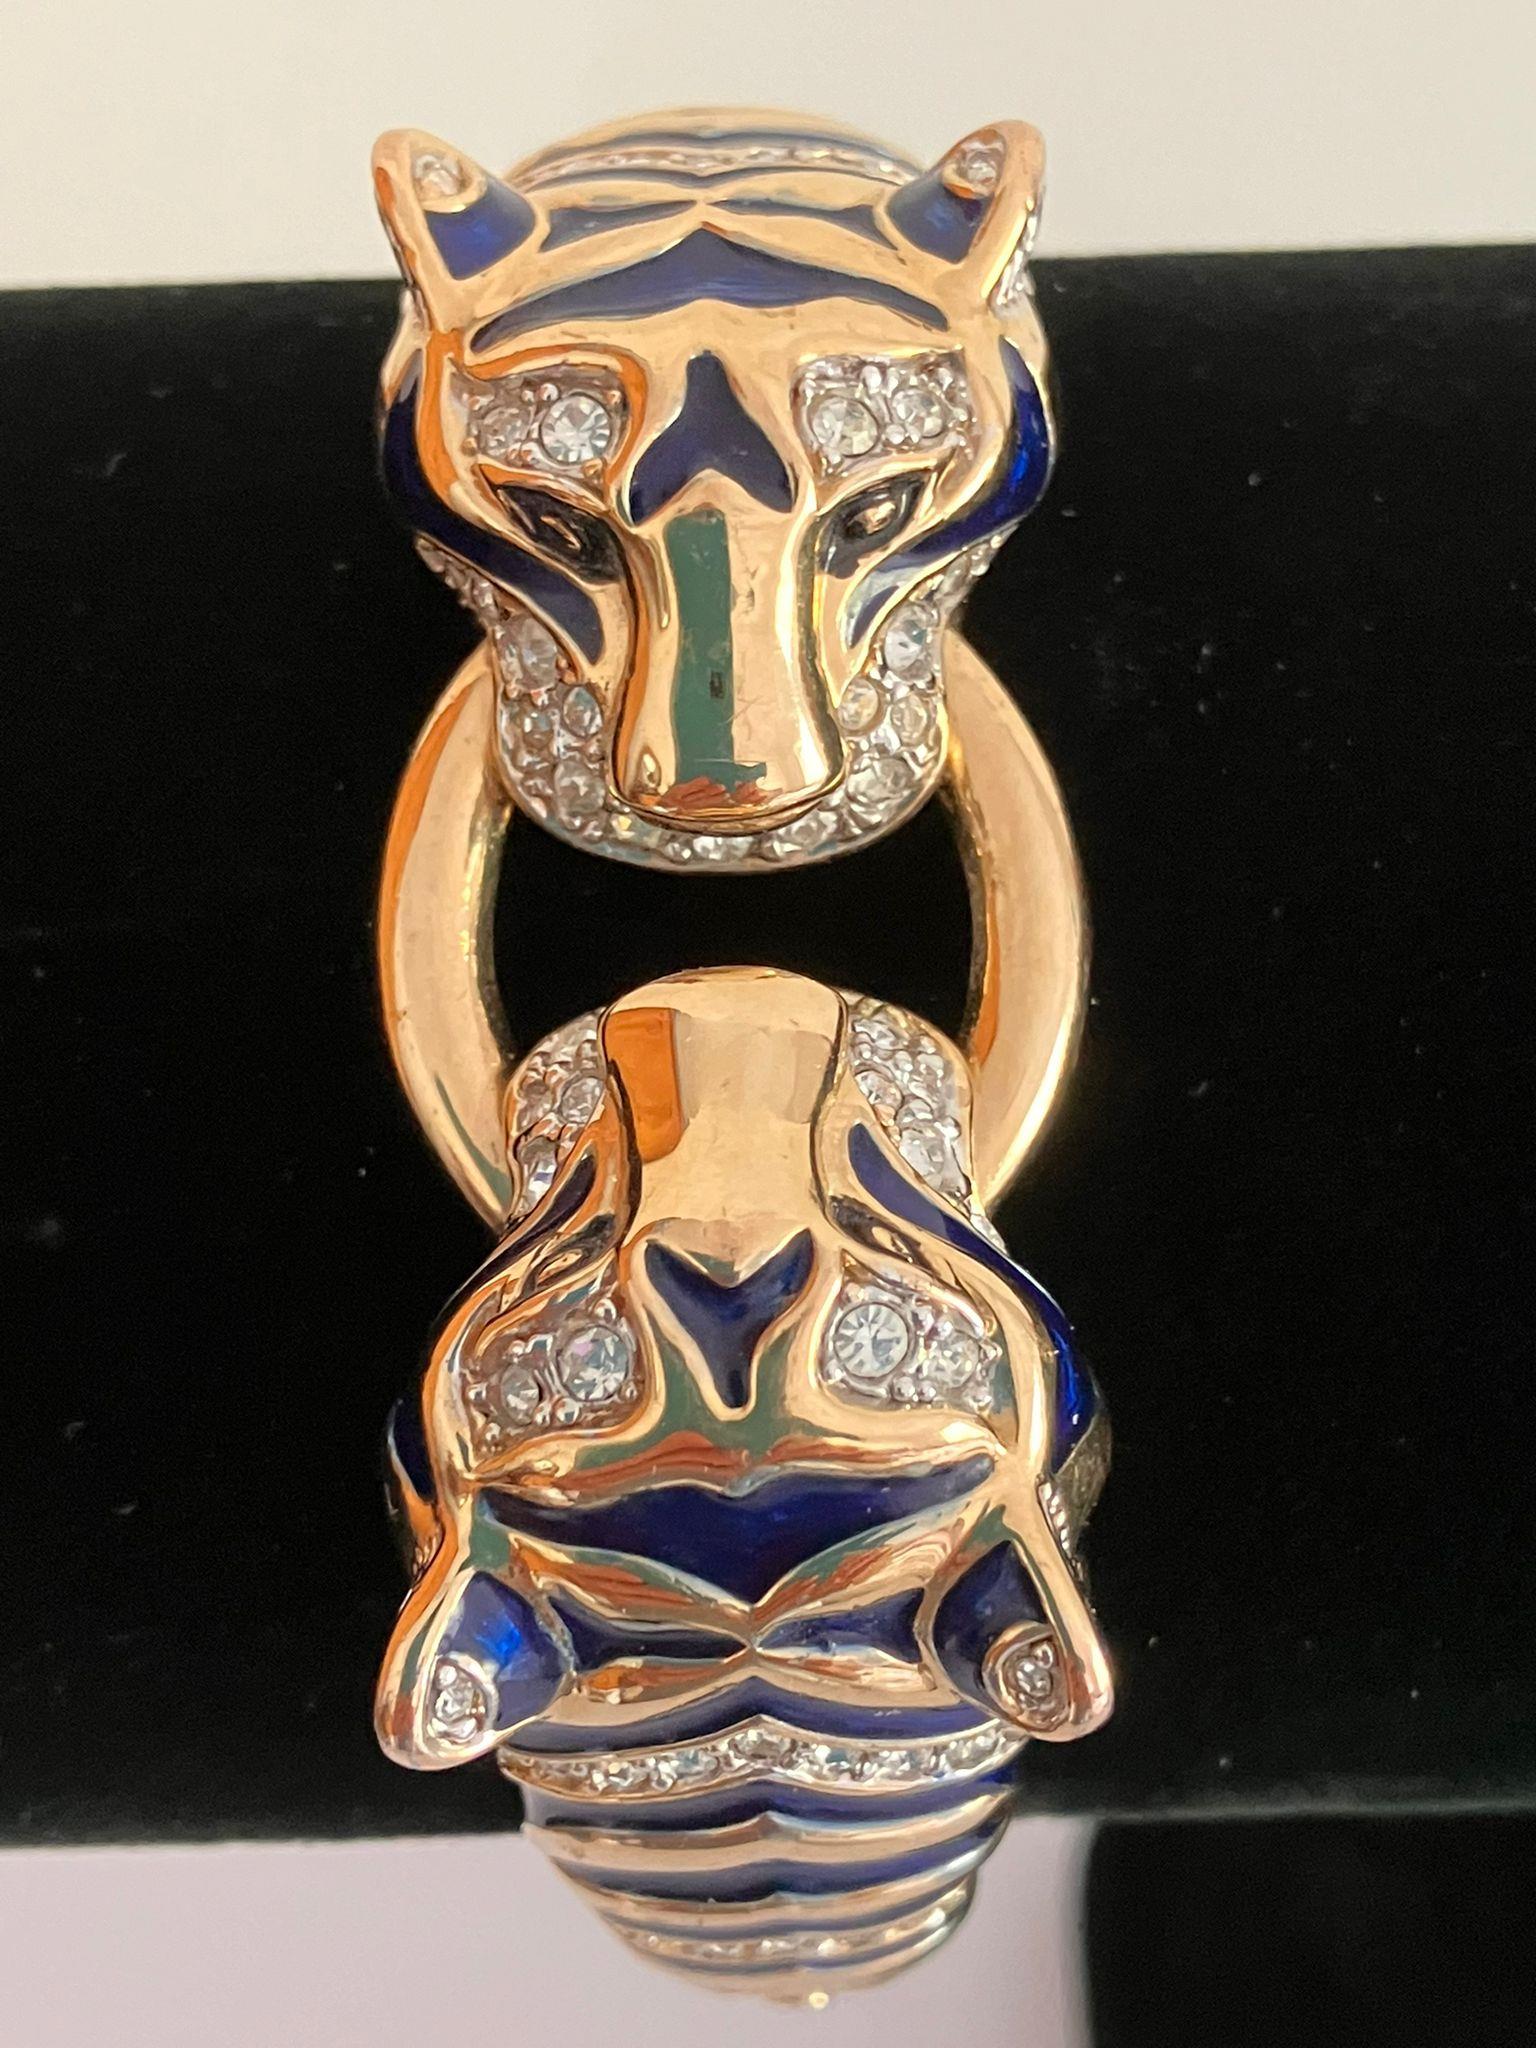 Vintage ‘Duchess of Windsor’ LEOPARD BANGLE. Heavily decorated with blue enamel and clear gemstones. - Image 2 of 3